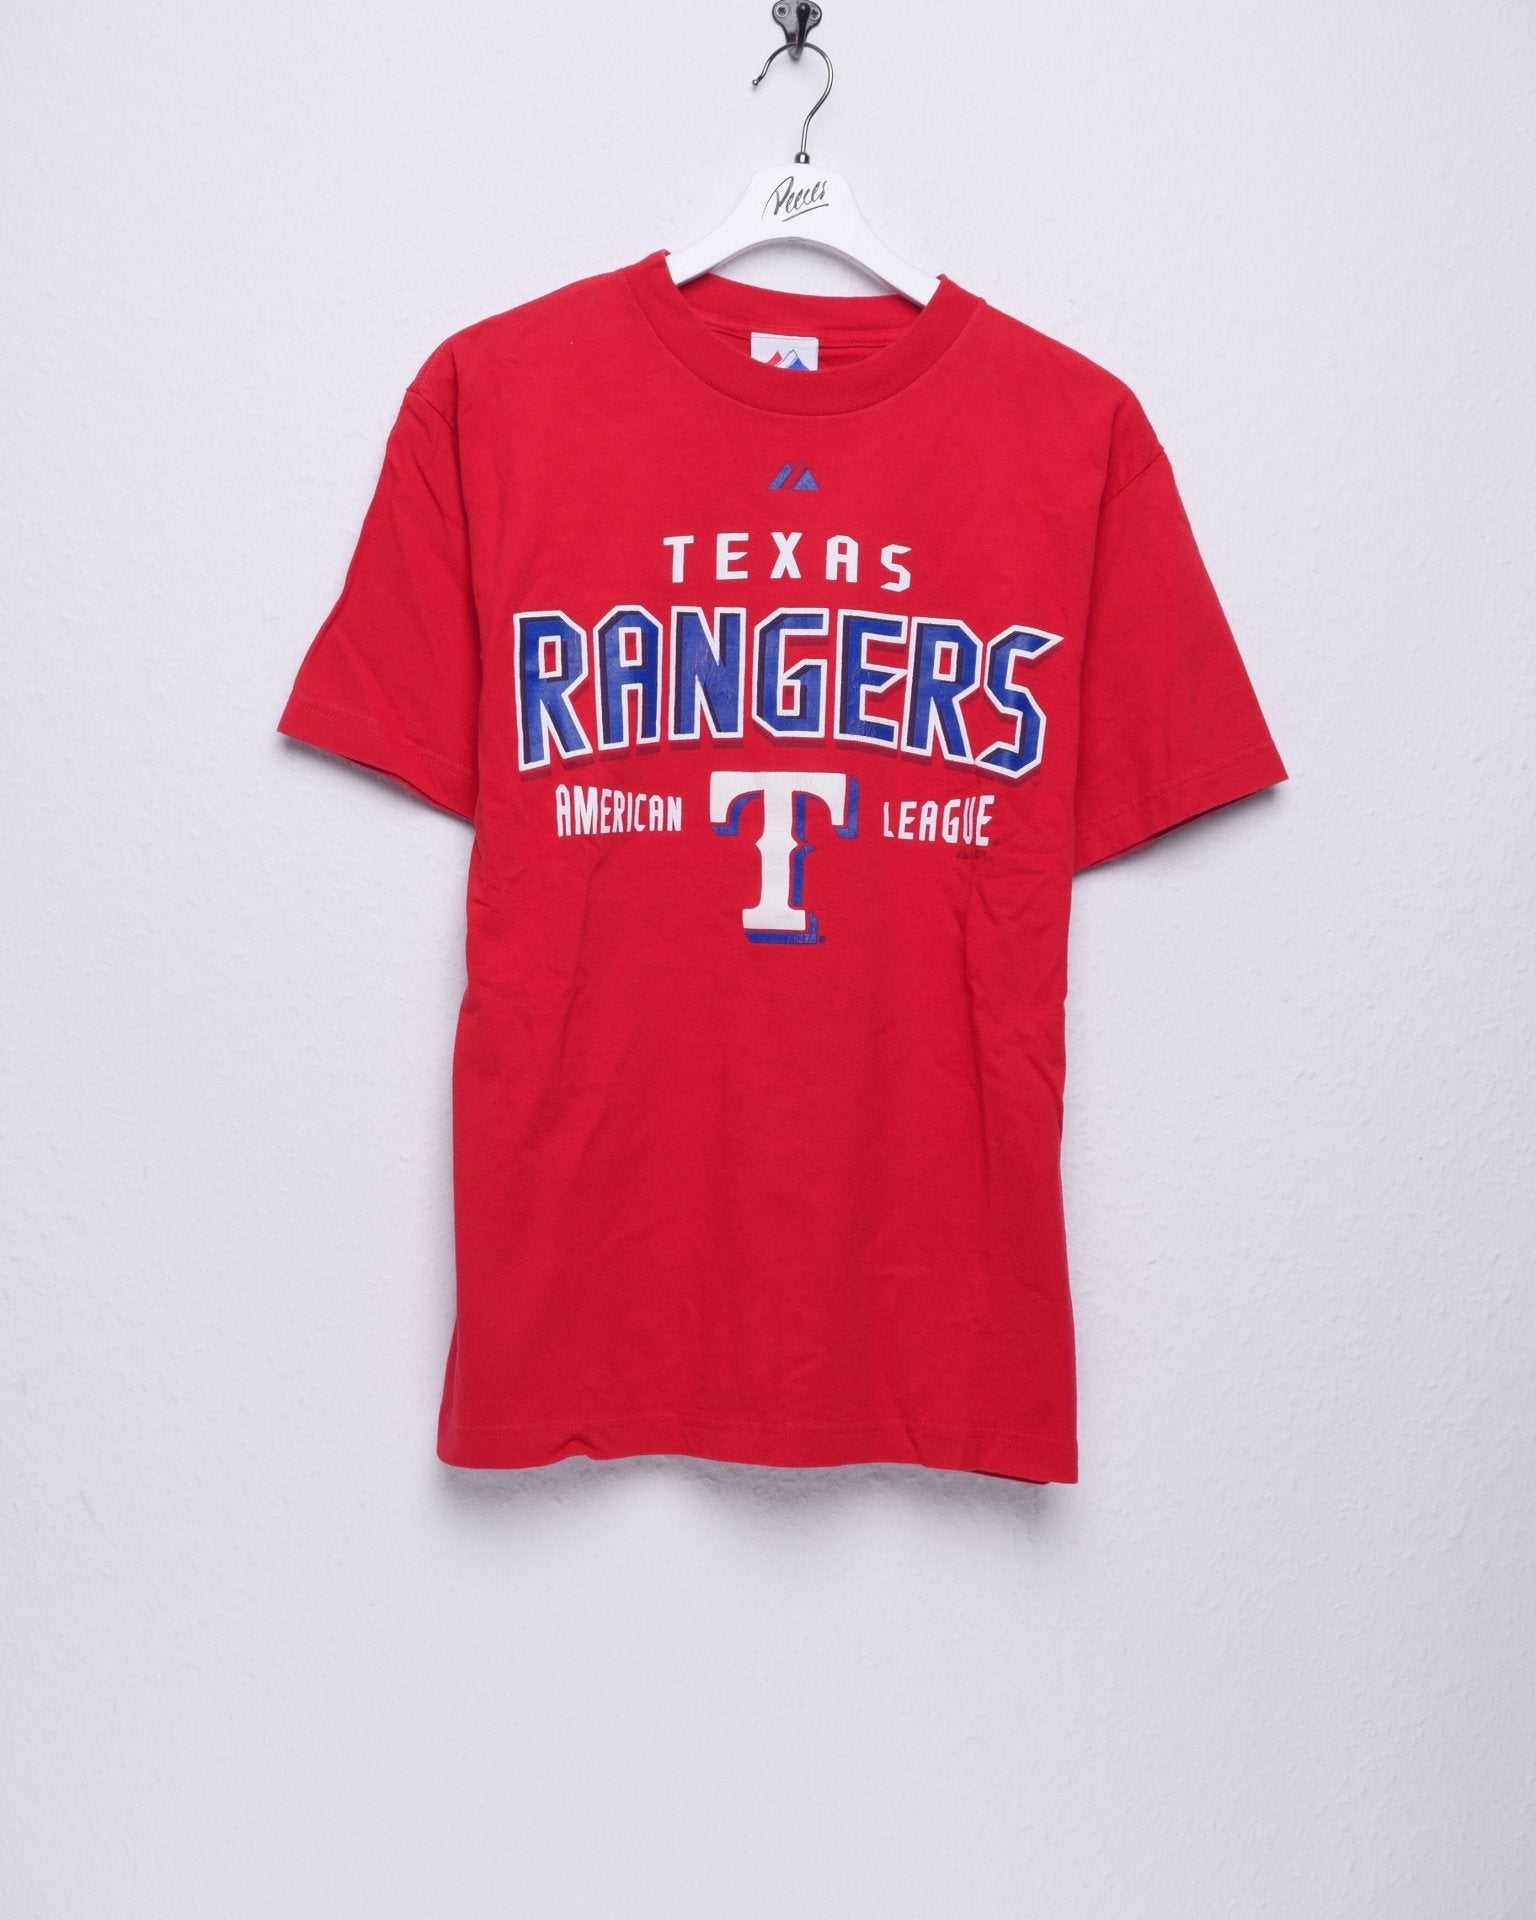 Rangers printed Spellout Shirt - Peeces